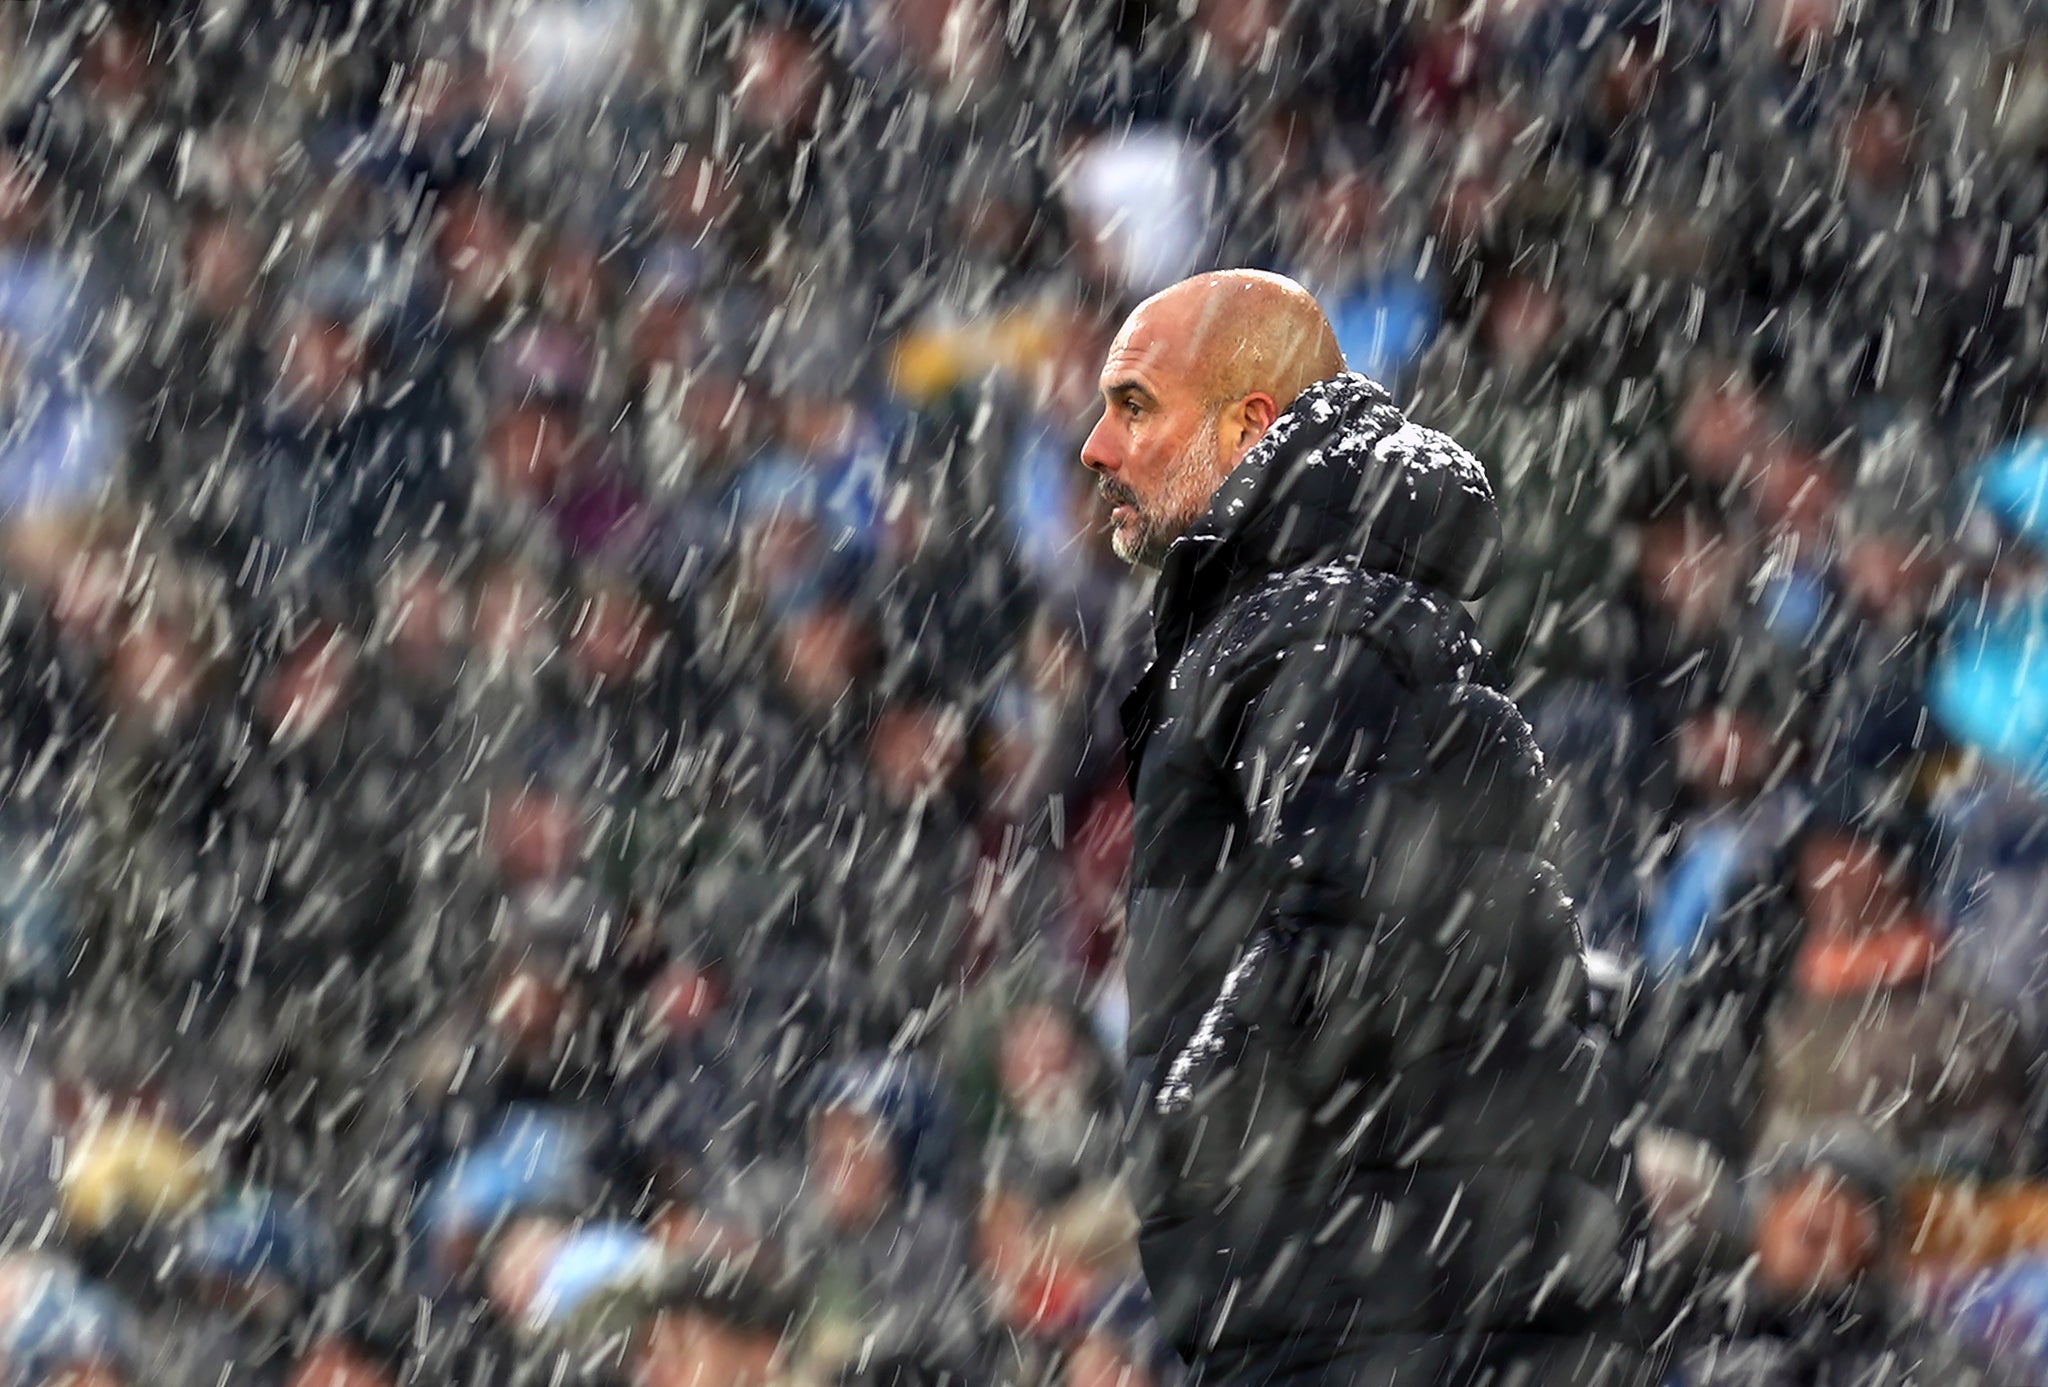 Manchester City manager Pep Guardiola saw his side brave the elements to beat West Ham 2-1 at a snowy Etihad Stadium, which cut Chelsea’s lead down to a point (Martin Rickett/PA)